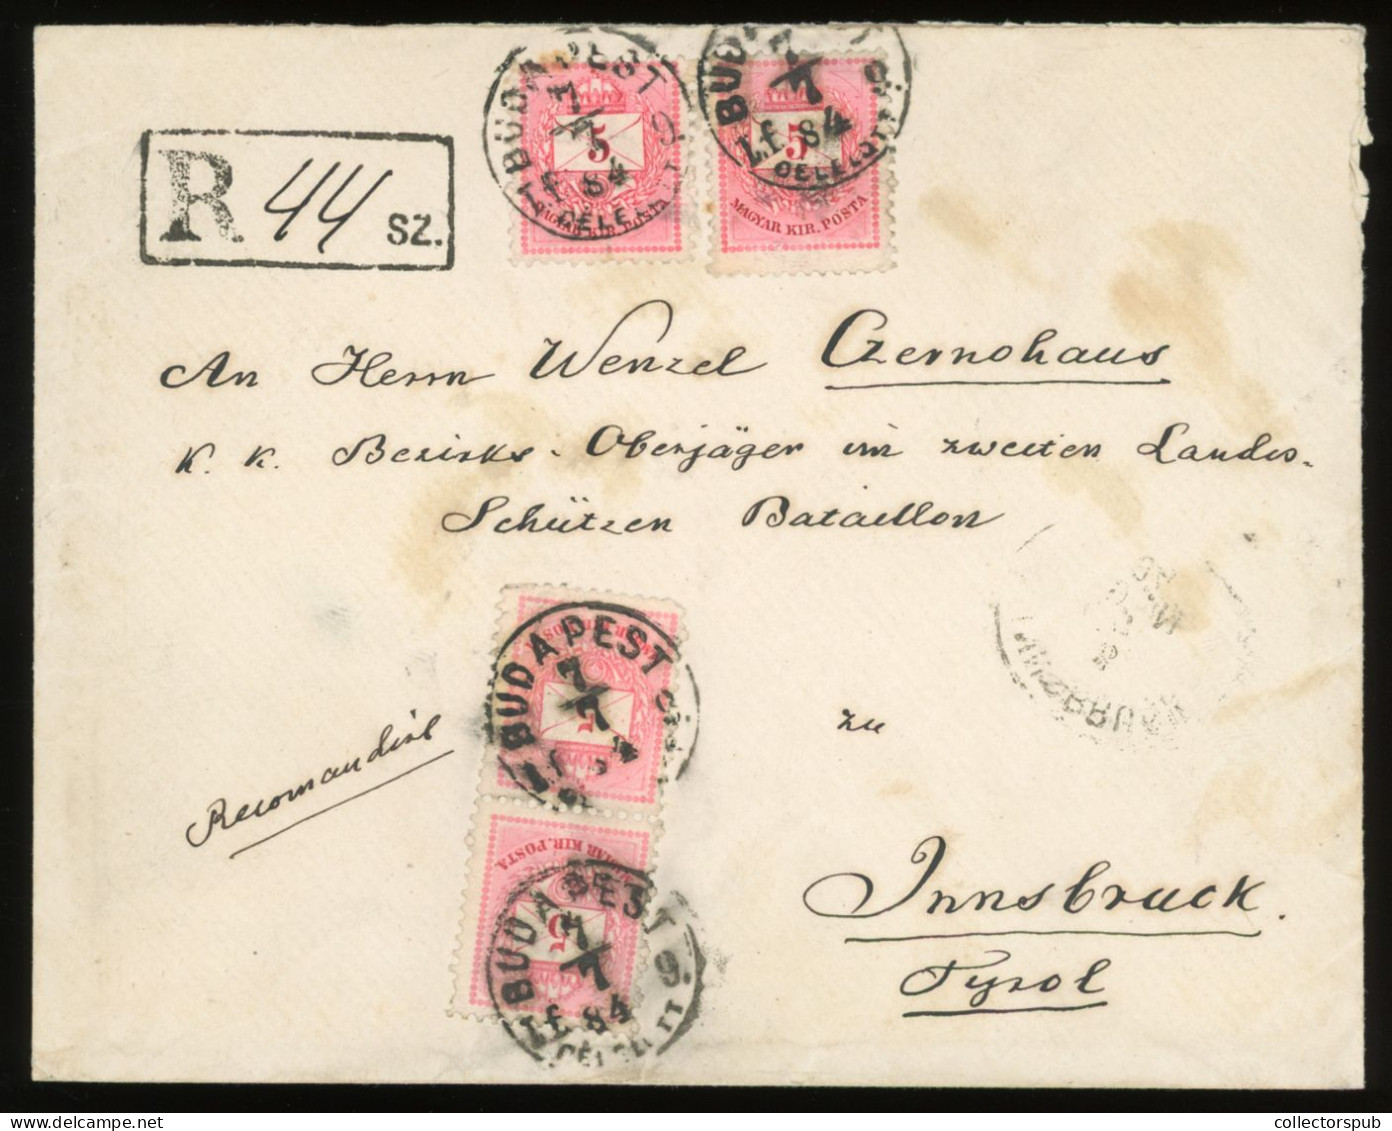 HUNGARY BUDAPEST 1884. Nice Registered Cover To Innsbruck - Lettres & Documents